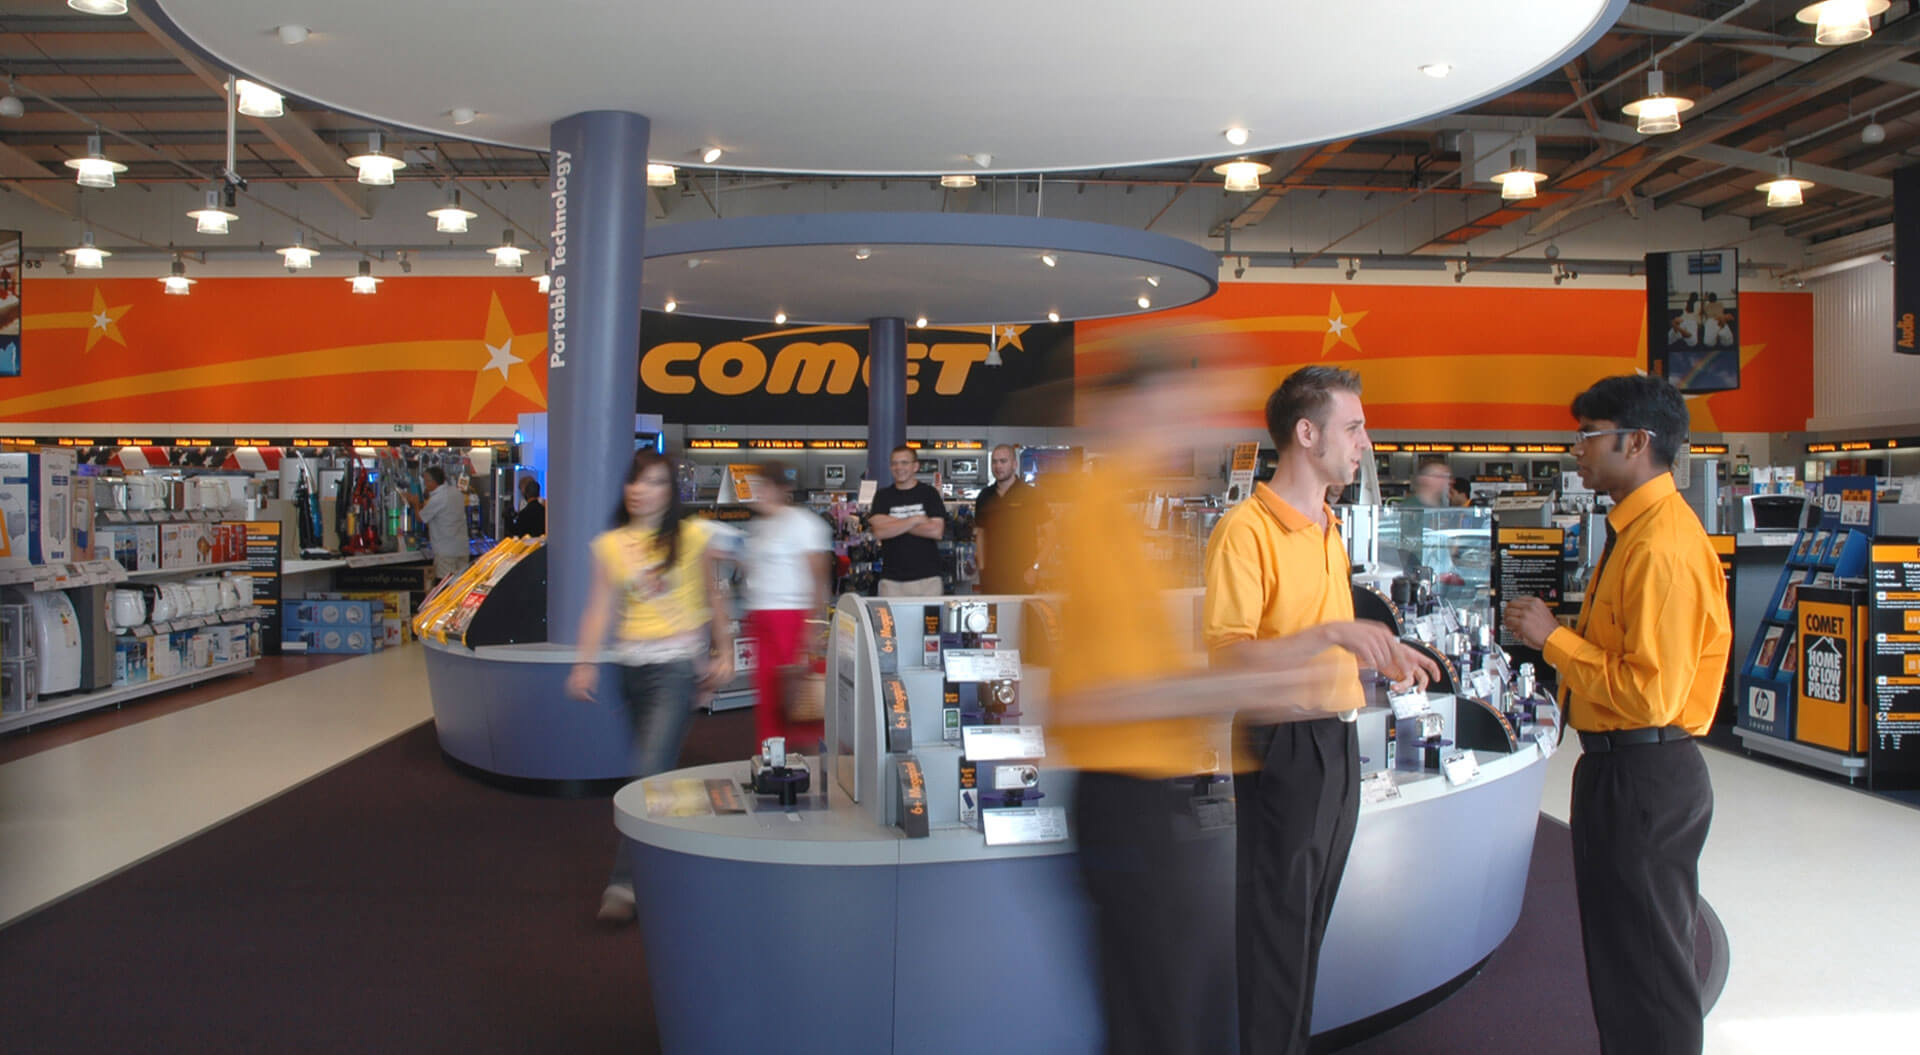 Comet electronic and technology reatil store design merchandising systems